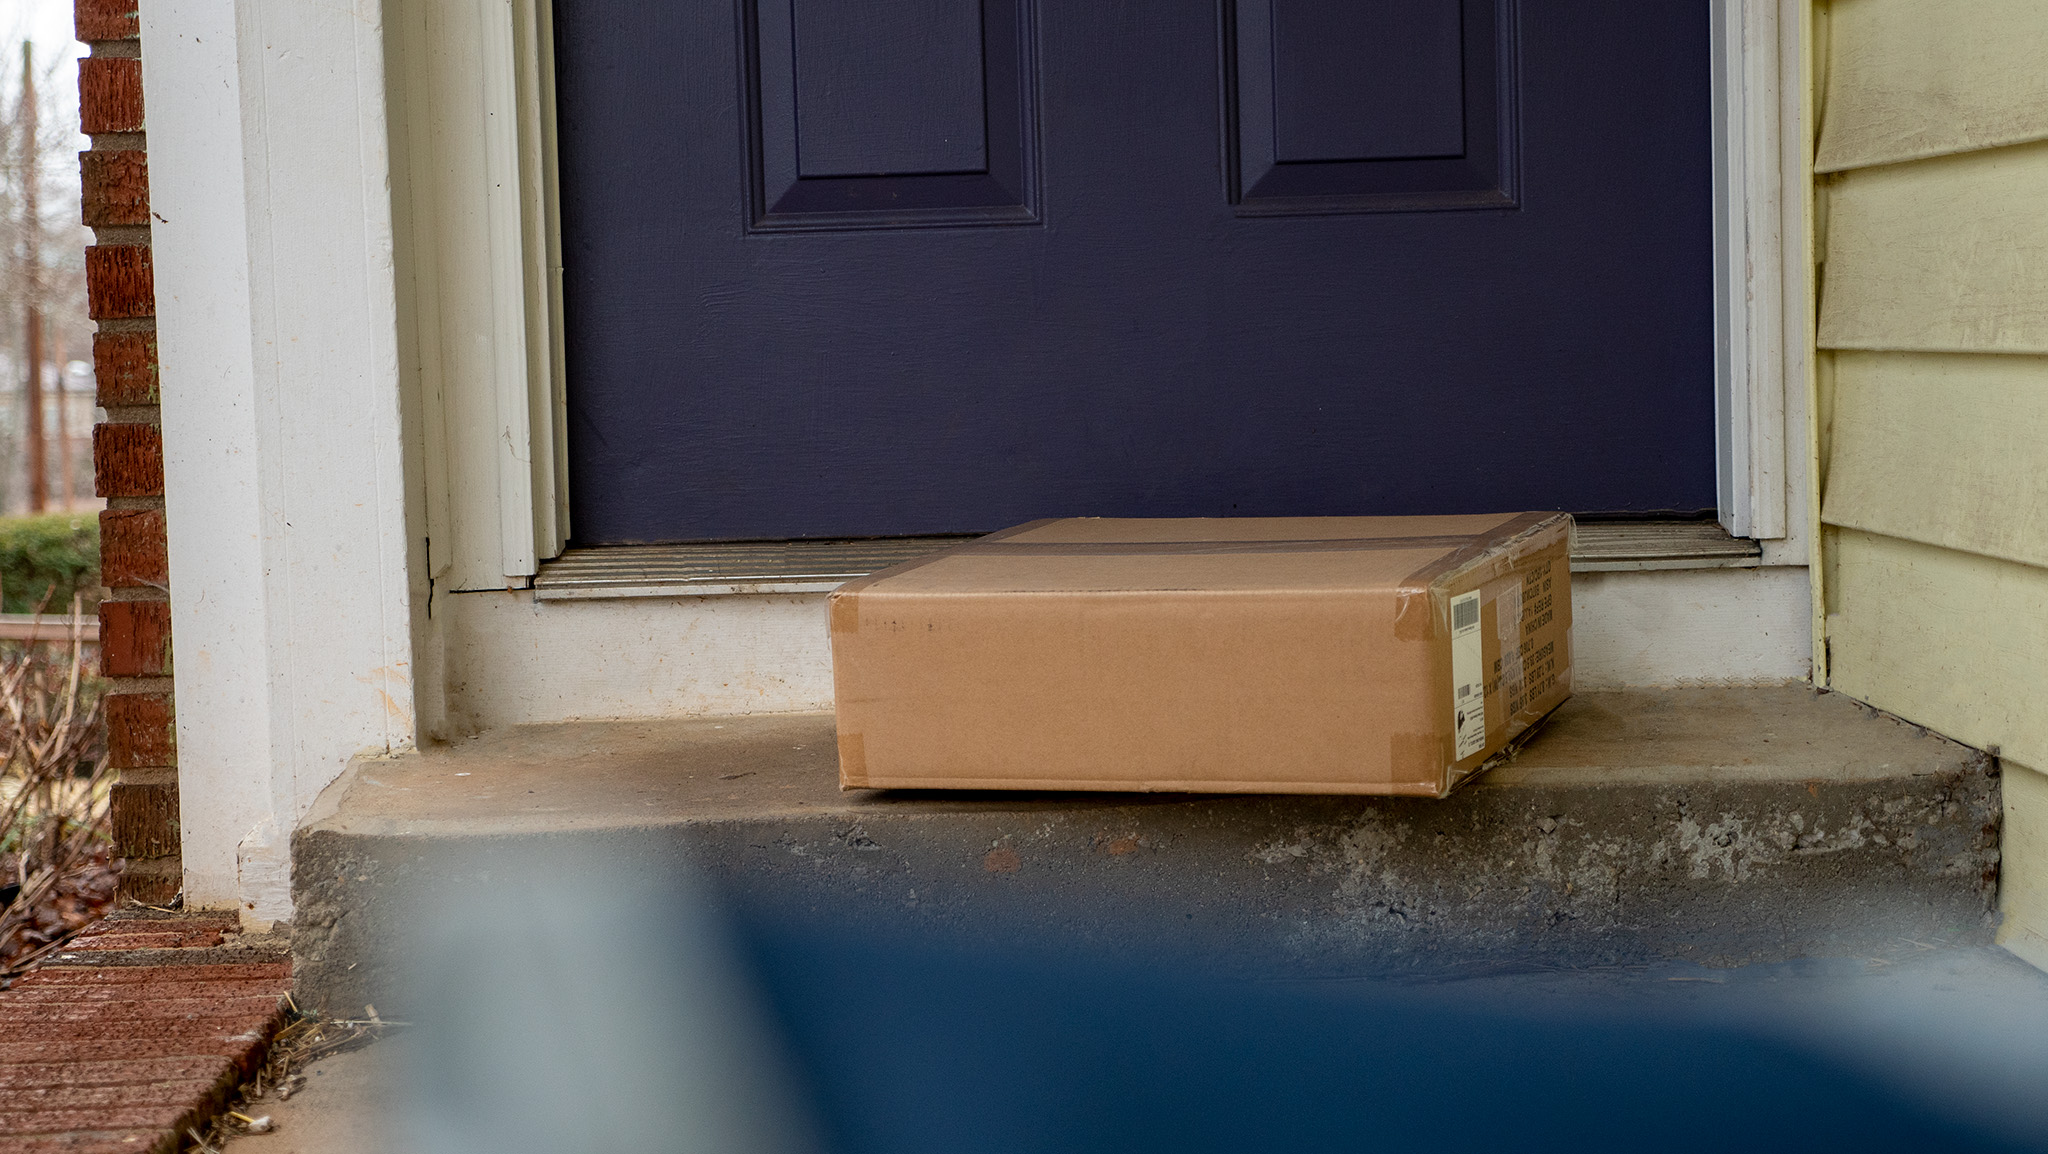 How to get package alerts from your Ring doorbell or camera